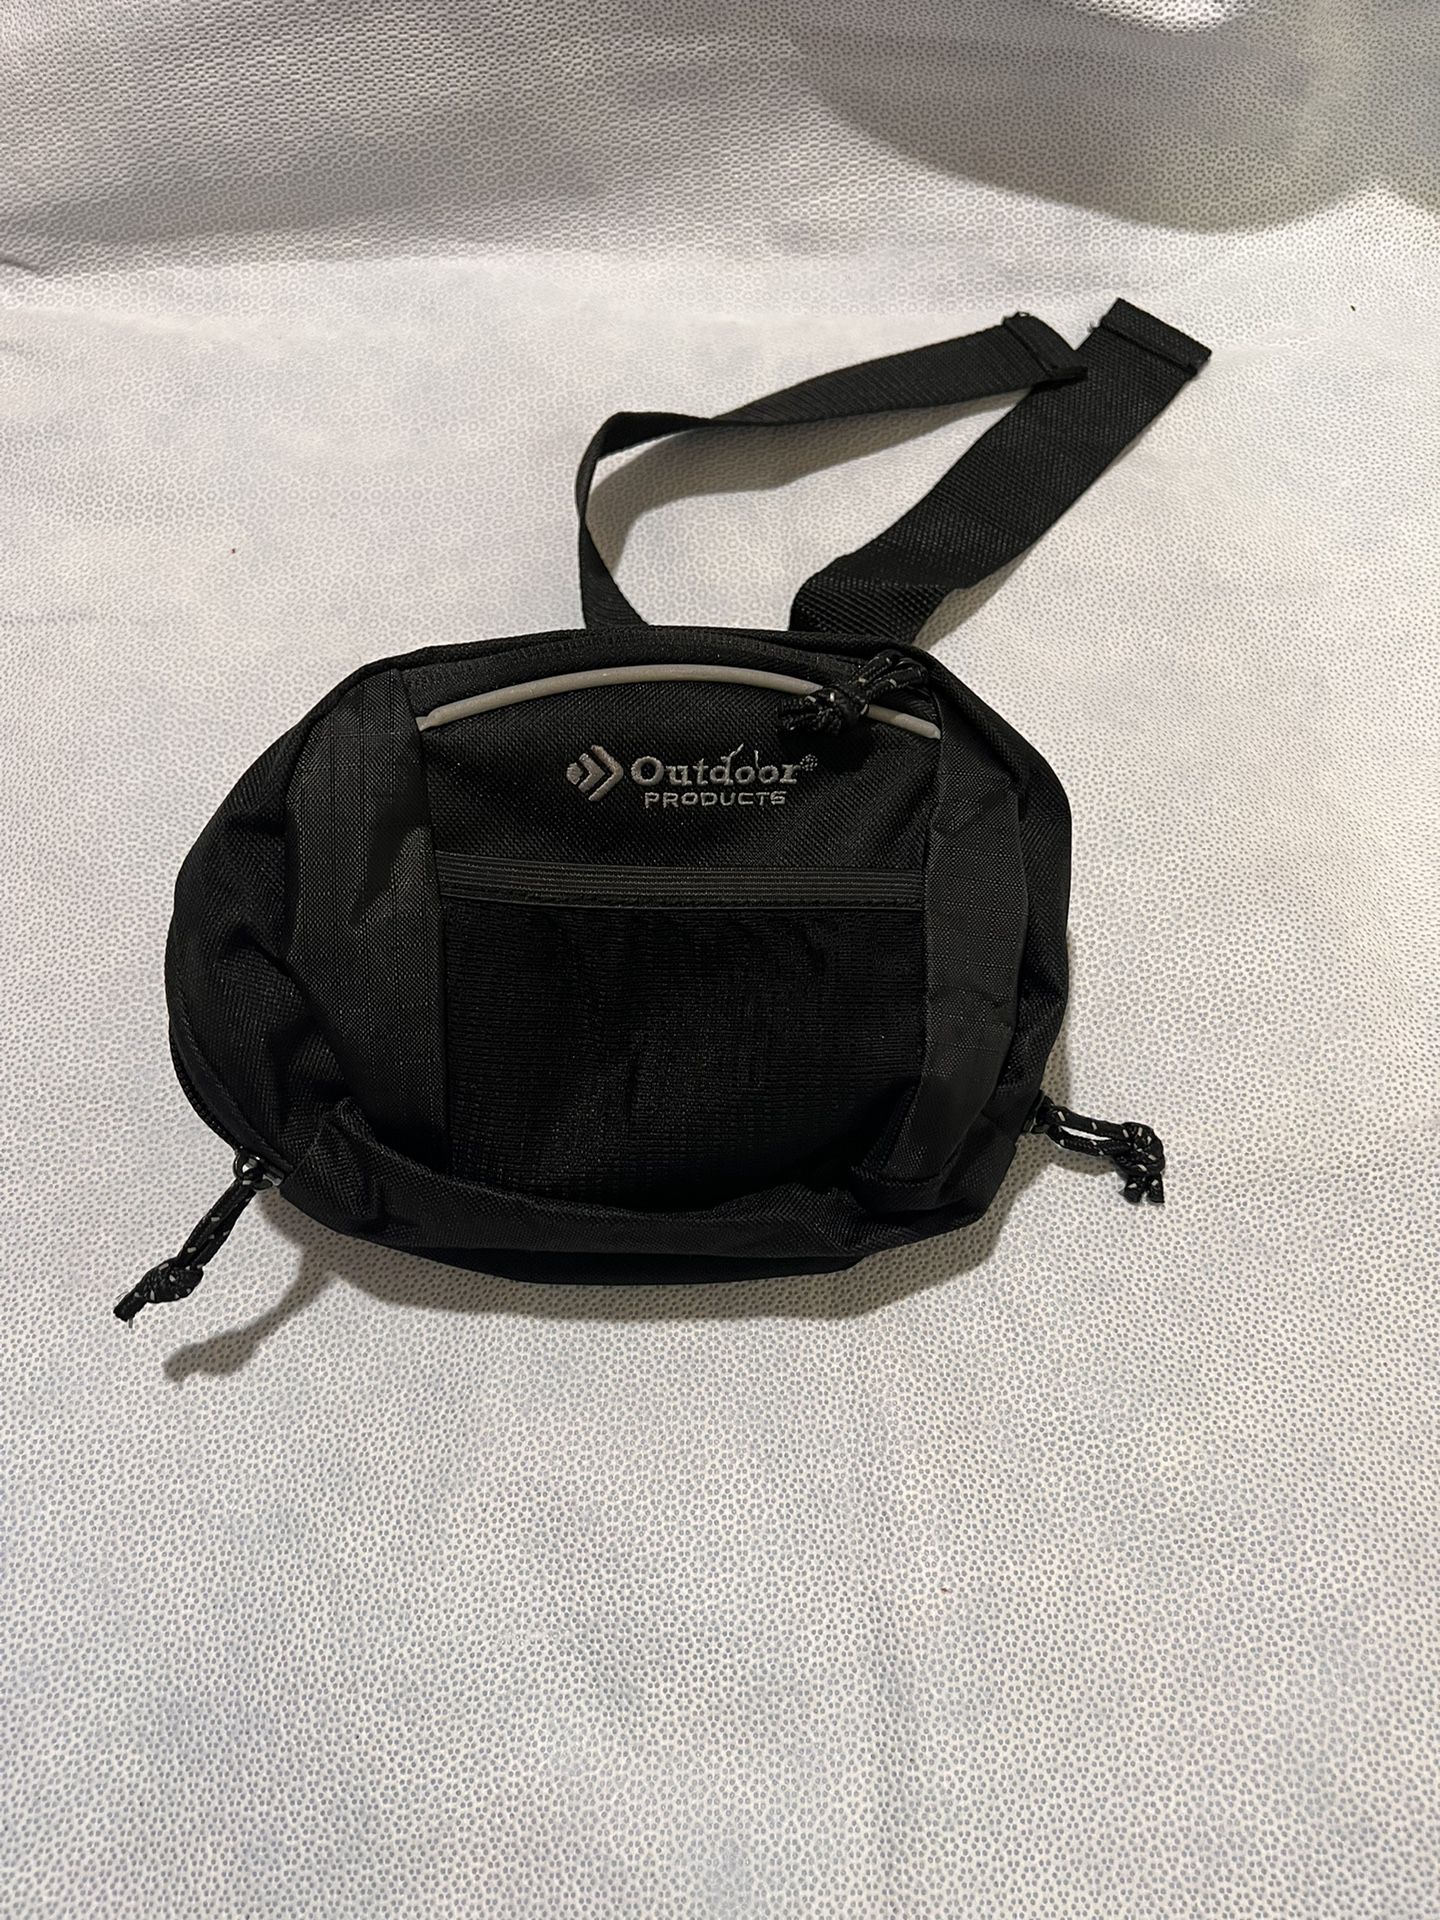 Outdoor Products Waist Bag